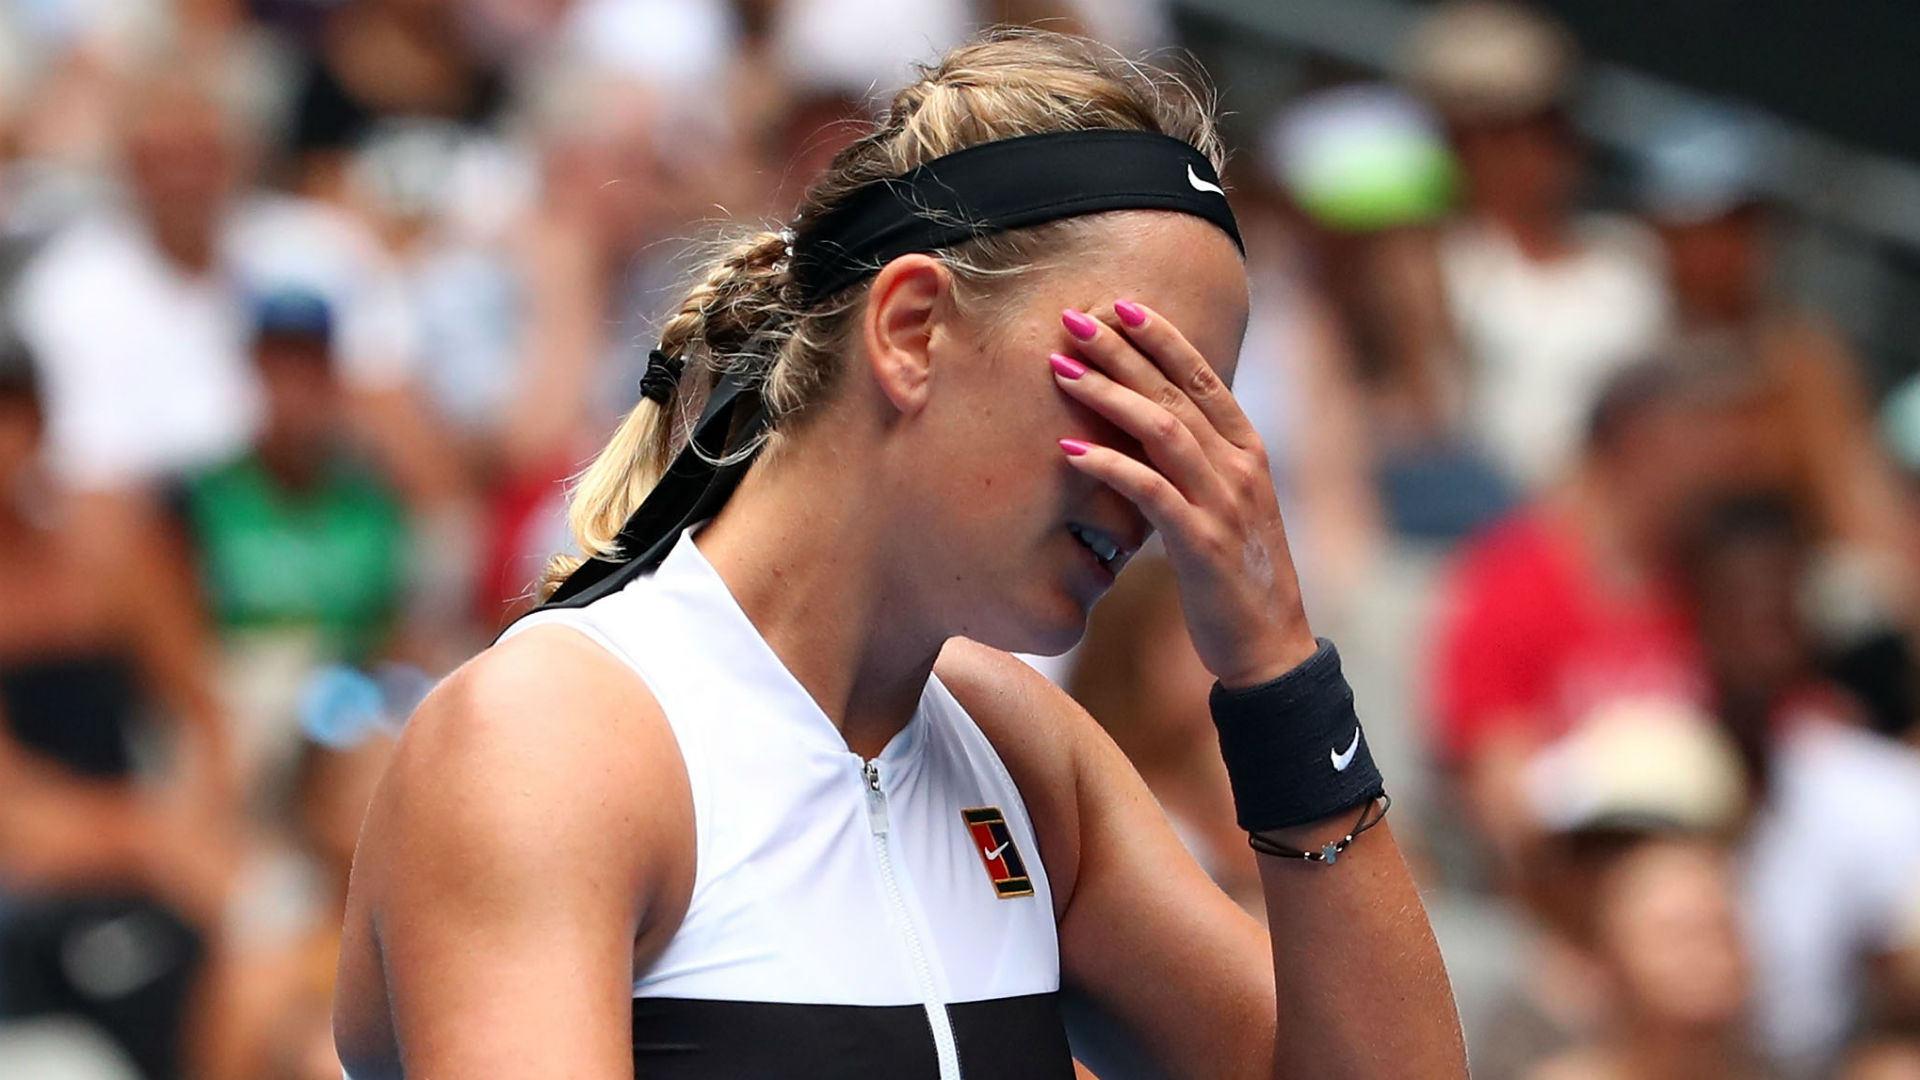 Victoria Azarenka said she was "struggling" following her early exit at the Australian Open, adding: "My confidence level is not there."